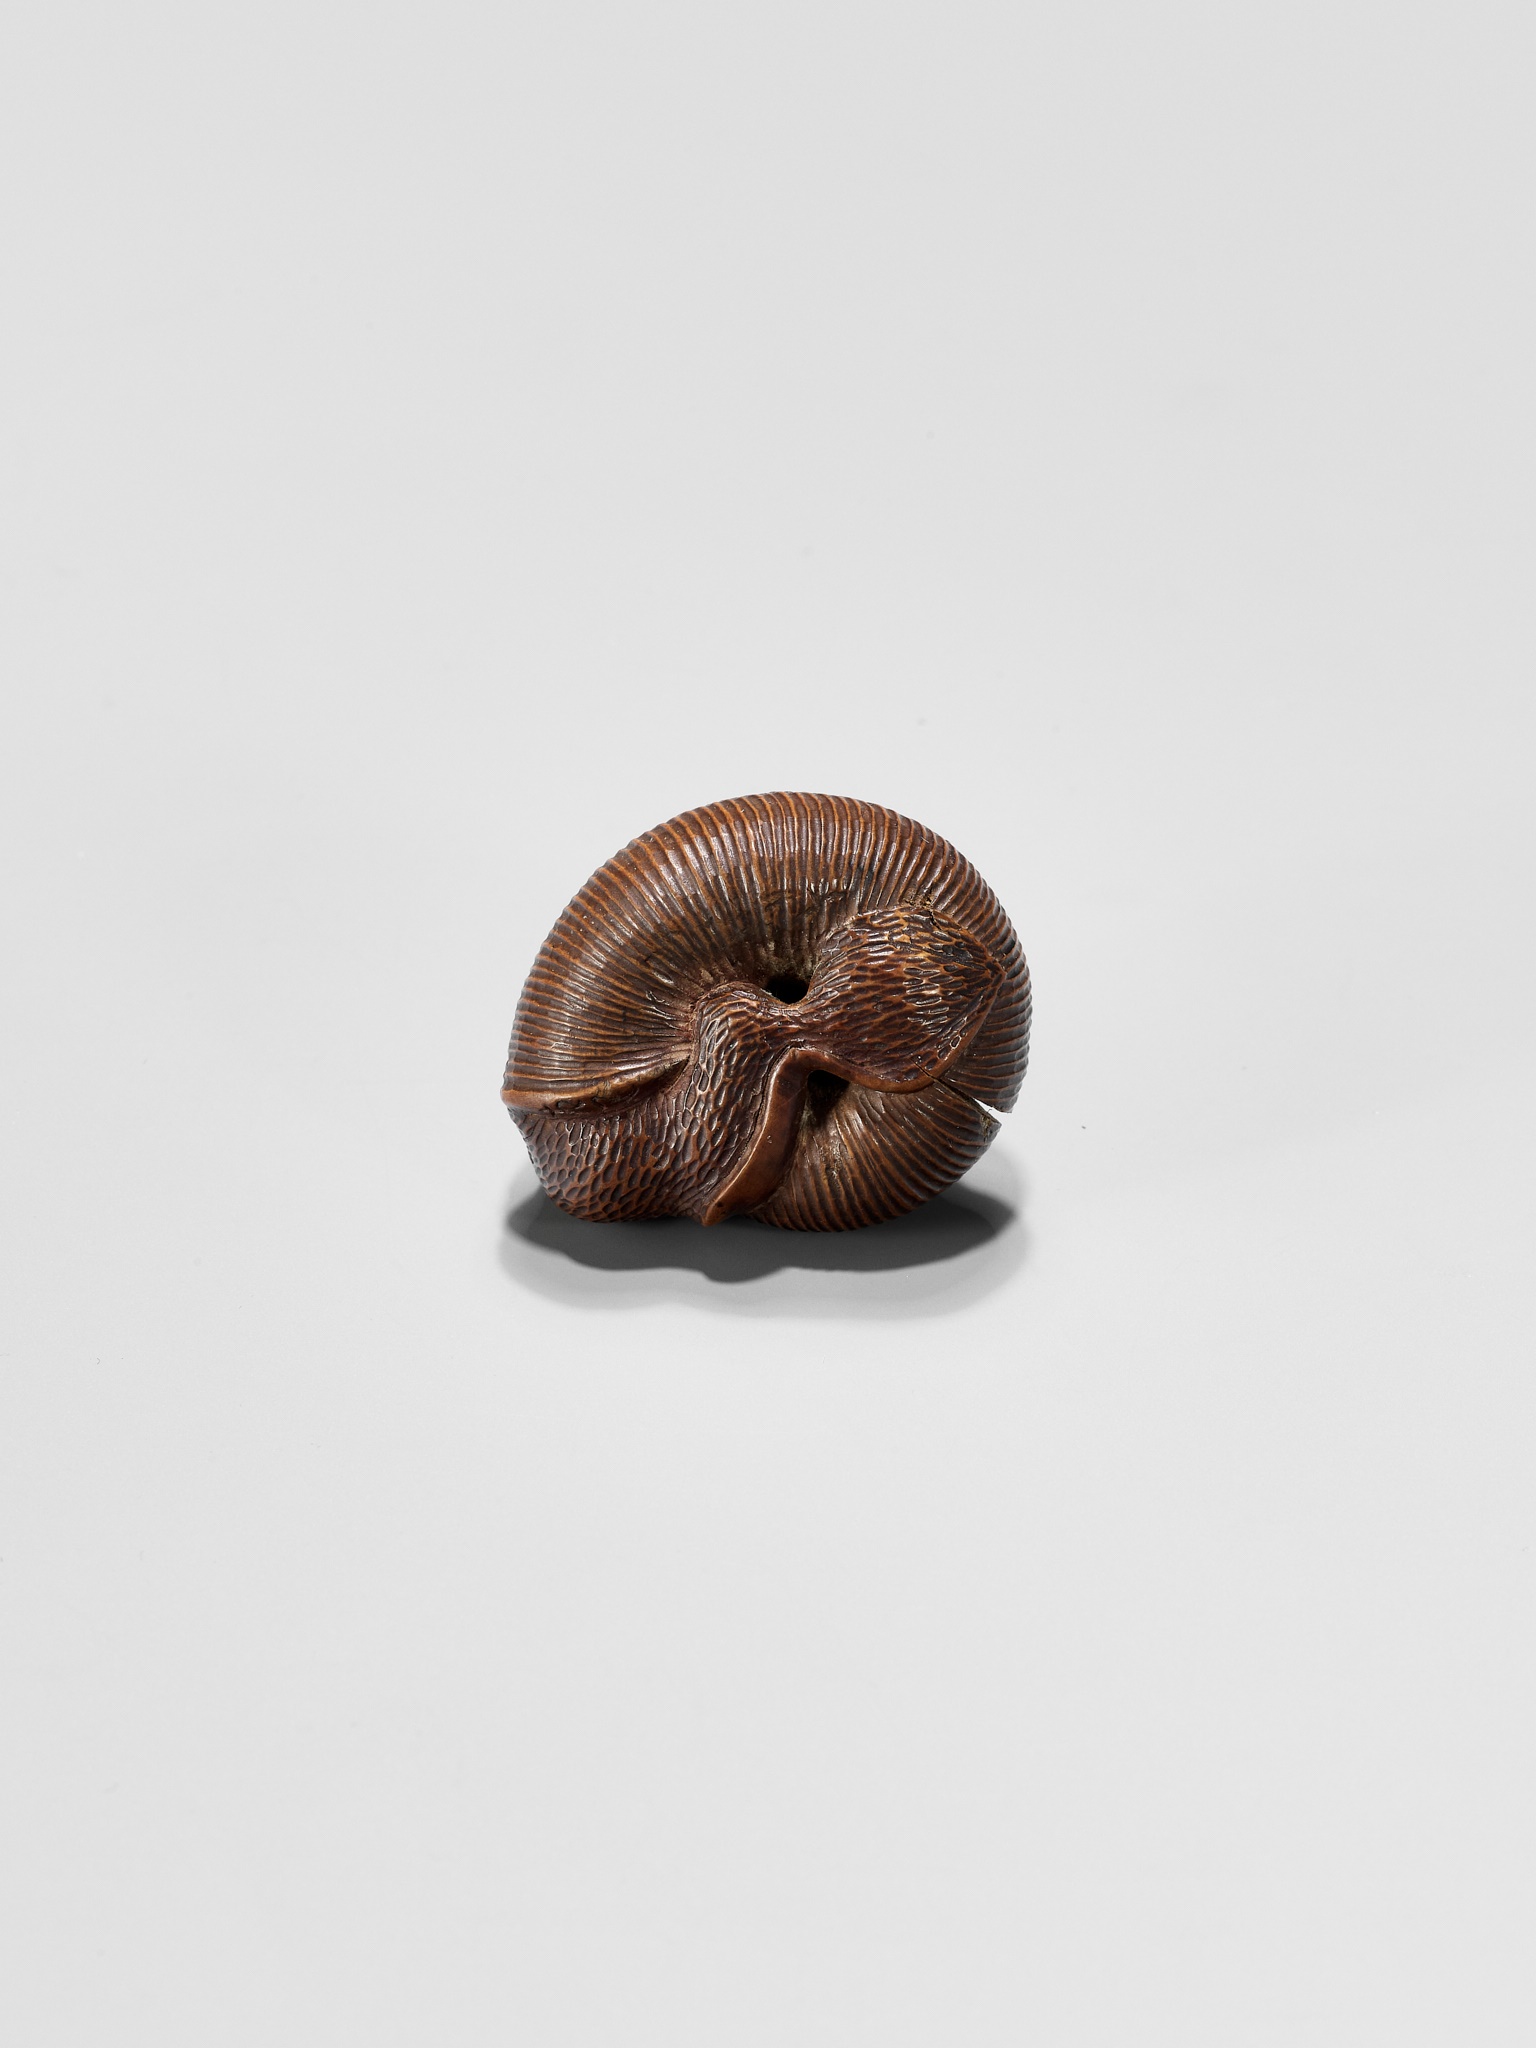 SARI: A FINE WOOD NETSUKE OF A SNAIL EMERGING FROM ITS SHELL - Image 11 of 12